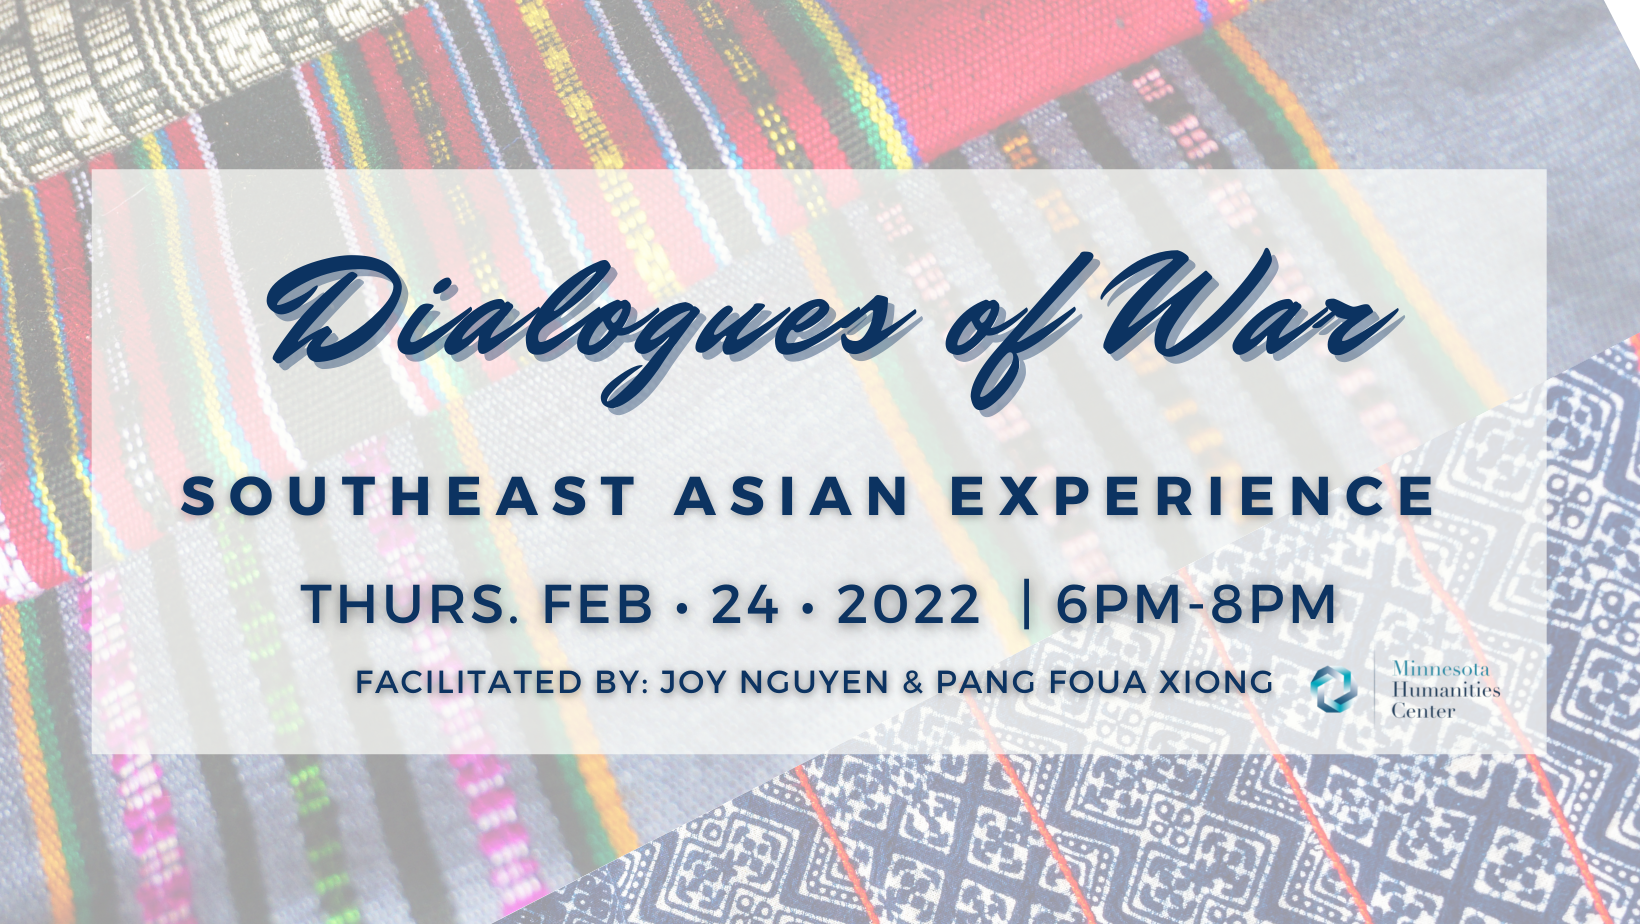 Dialogues of War Listening Session: Southeast Asian Experience, Thursday, February 24, 2022.